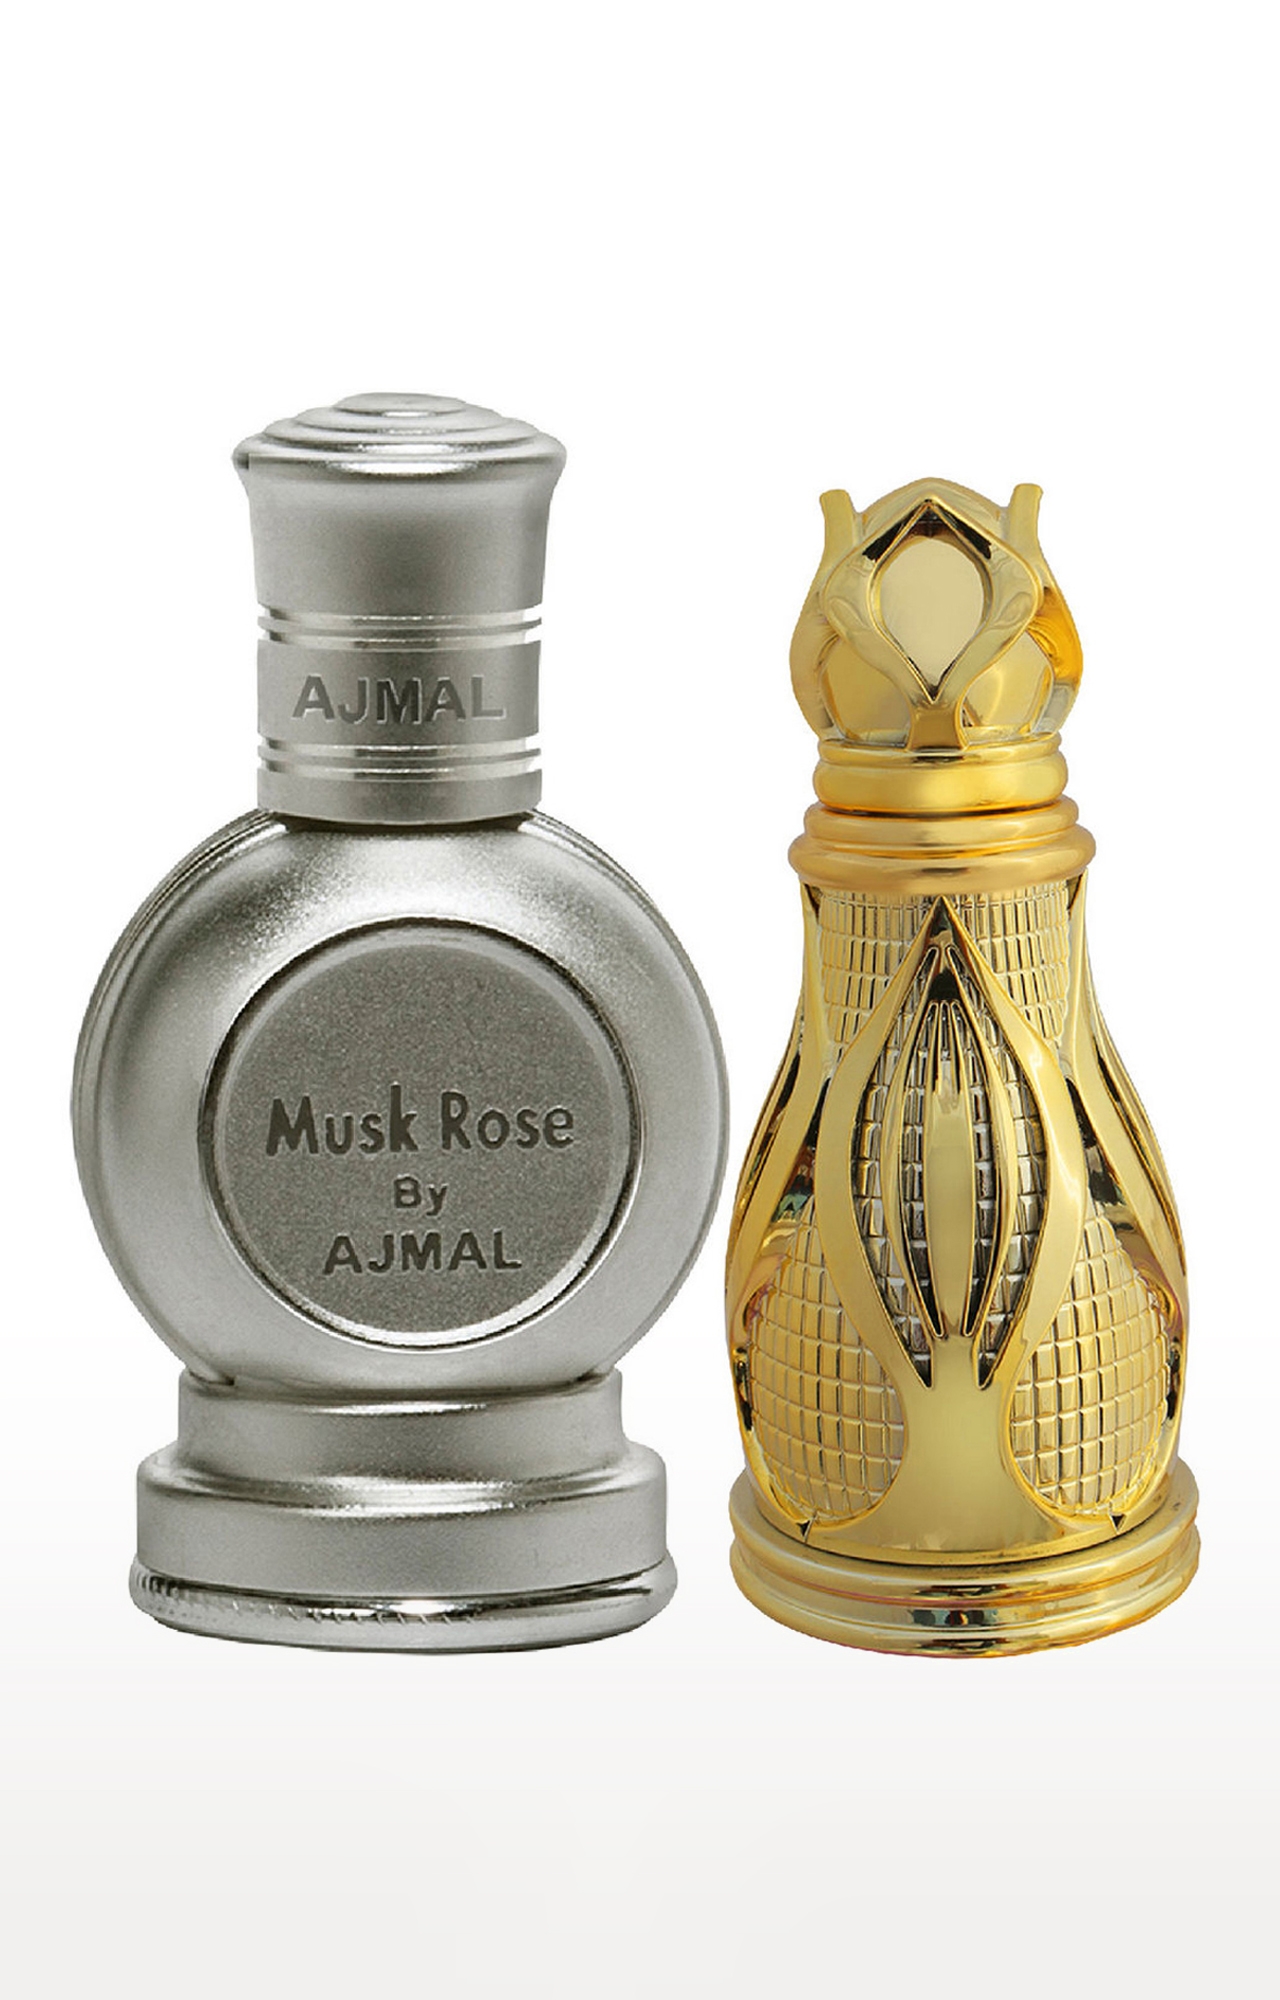 Ajmal Musk Rose Concentrated Perfume Oil Musky Alcohol-free Attar 12ml for Unisex and Khofooq Concentrated Perfume Oil Oudhy Alcohol-free Attar 18ml for Unisex